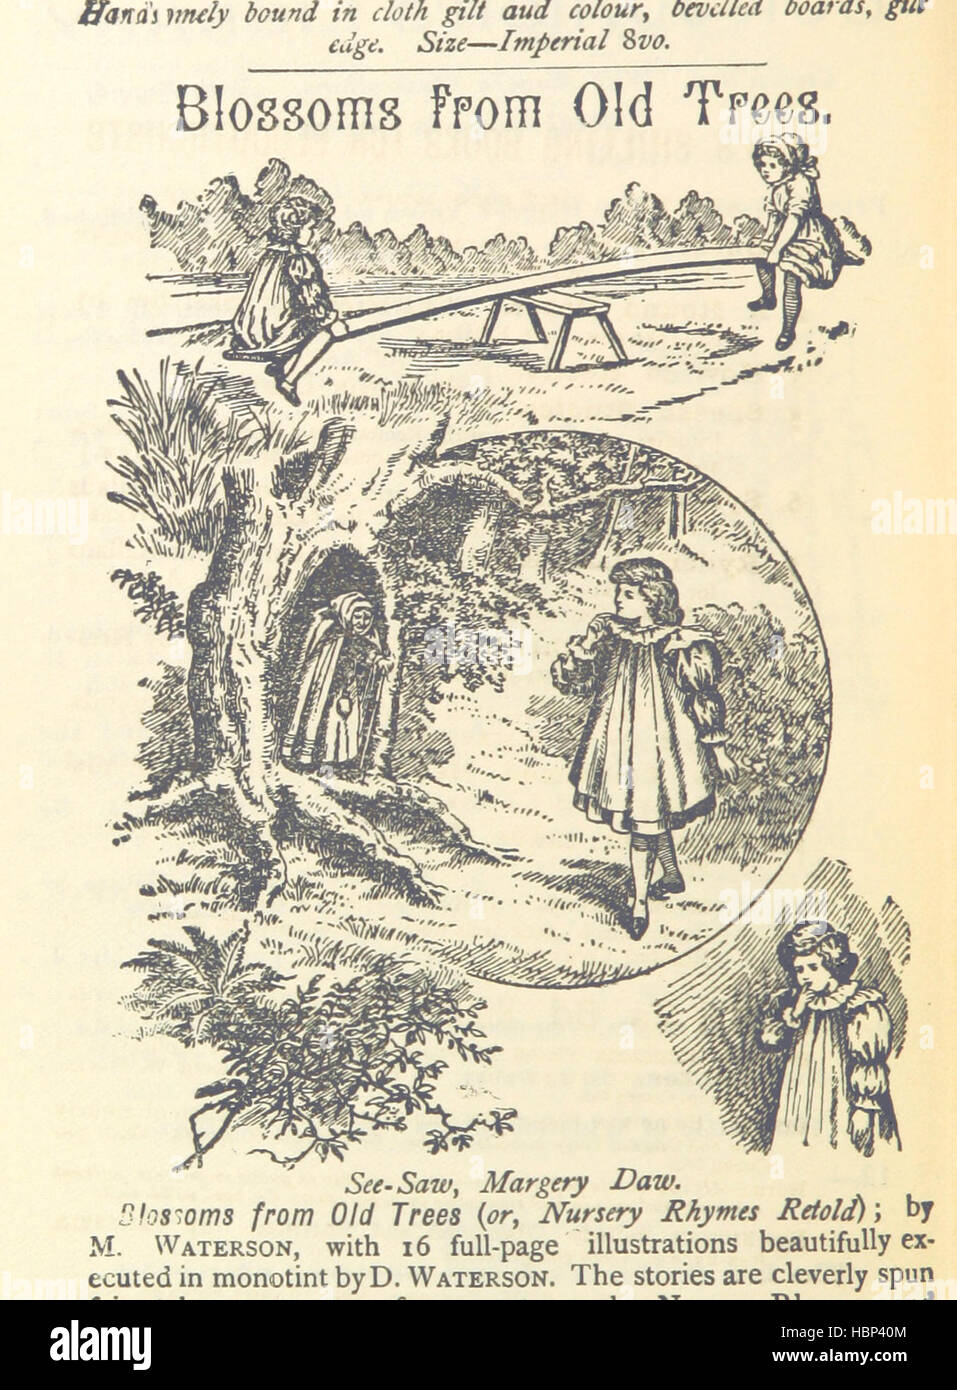 Image taken from page 320 of 'Victorian England' Image taken from page 320 of 'Victorian England' Stock Photo